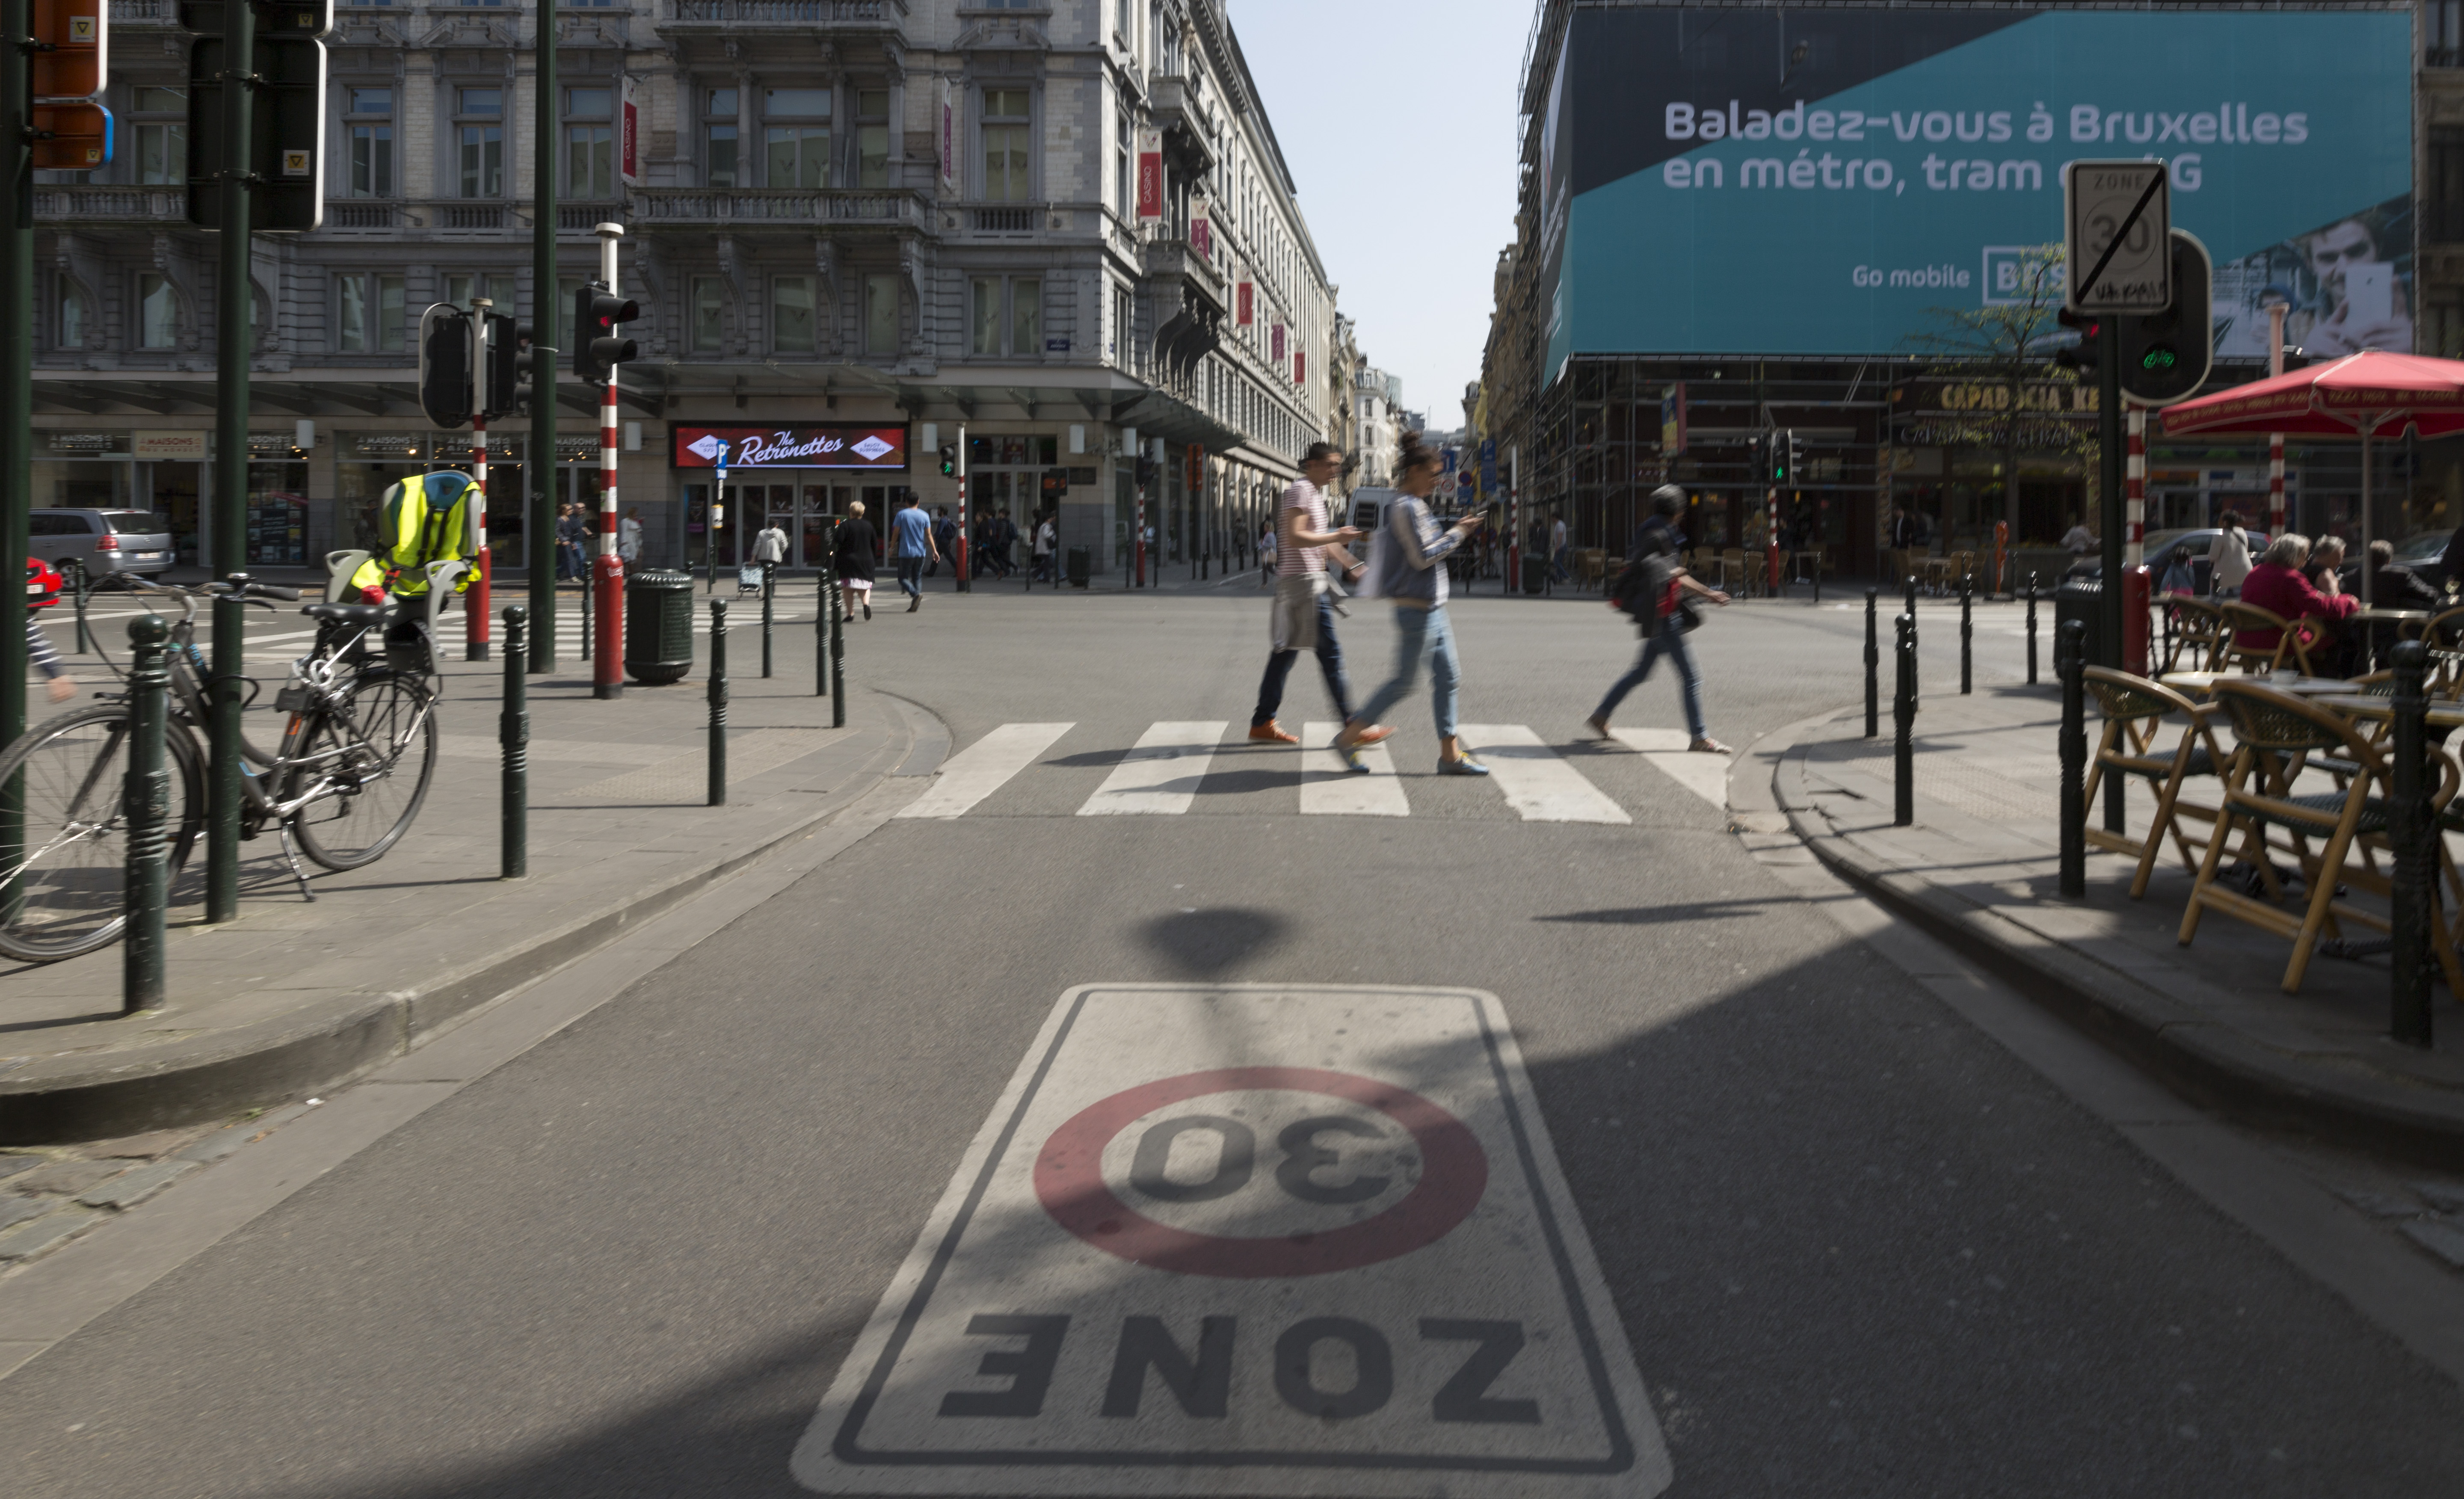 Brussels City 30: are cars more polluting at 30 km/h?